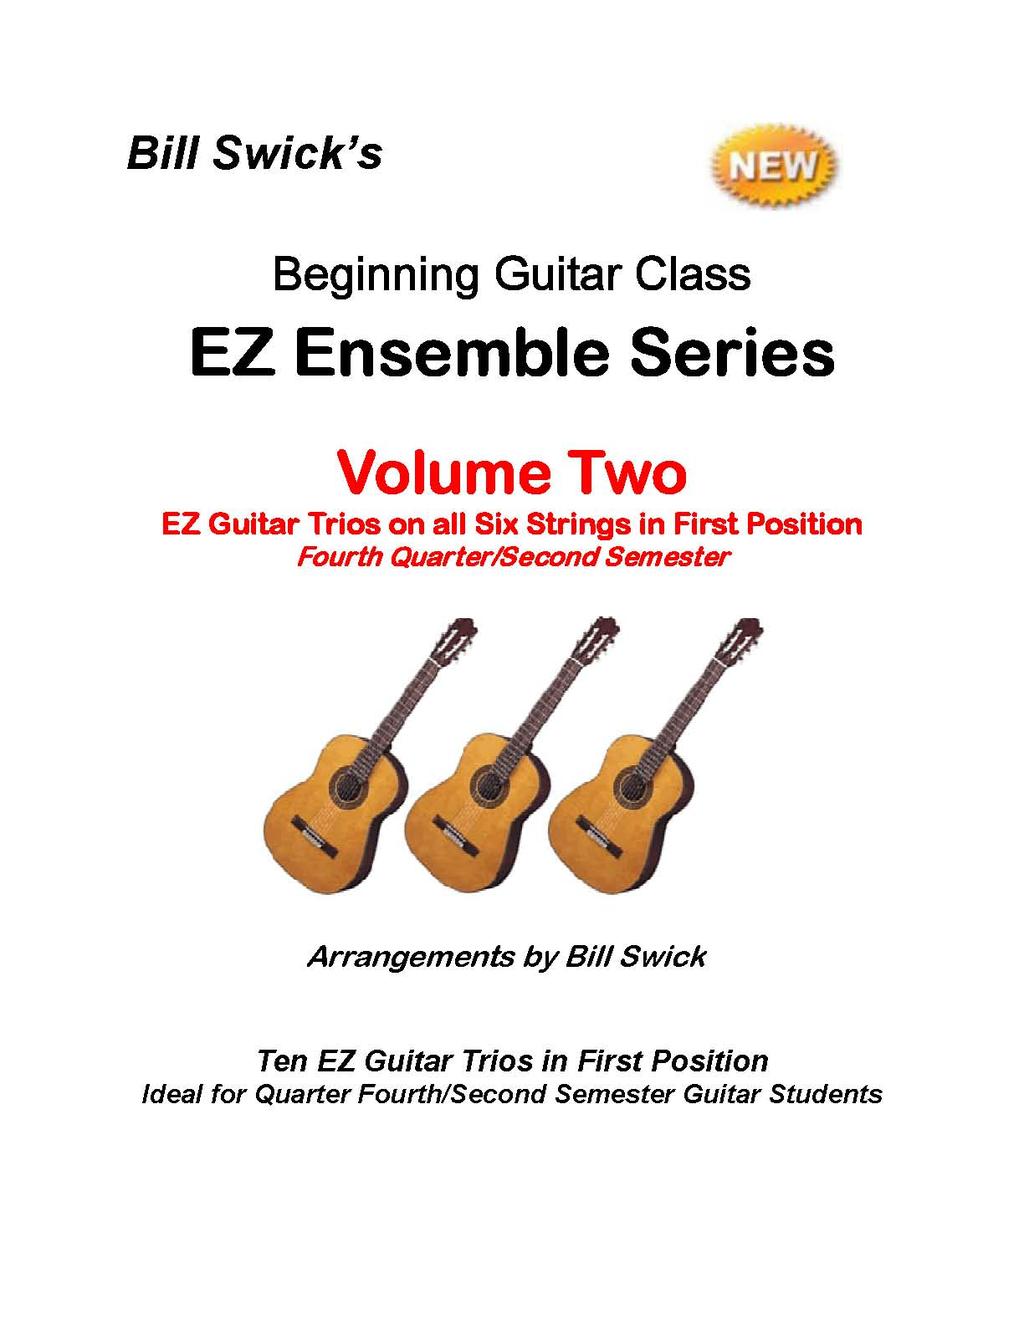 FREE! from wwwfreeguitarensemblemusiccom The following EZ Guitar Trio in First Position is made available to you at no cost from freeguitarensemblemusiccom Try it Perform it If you like it and would